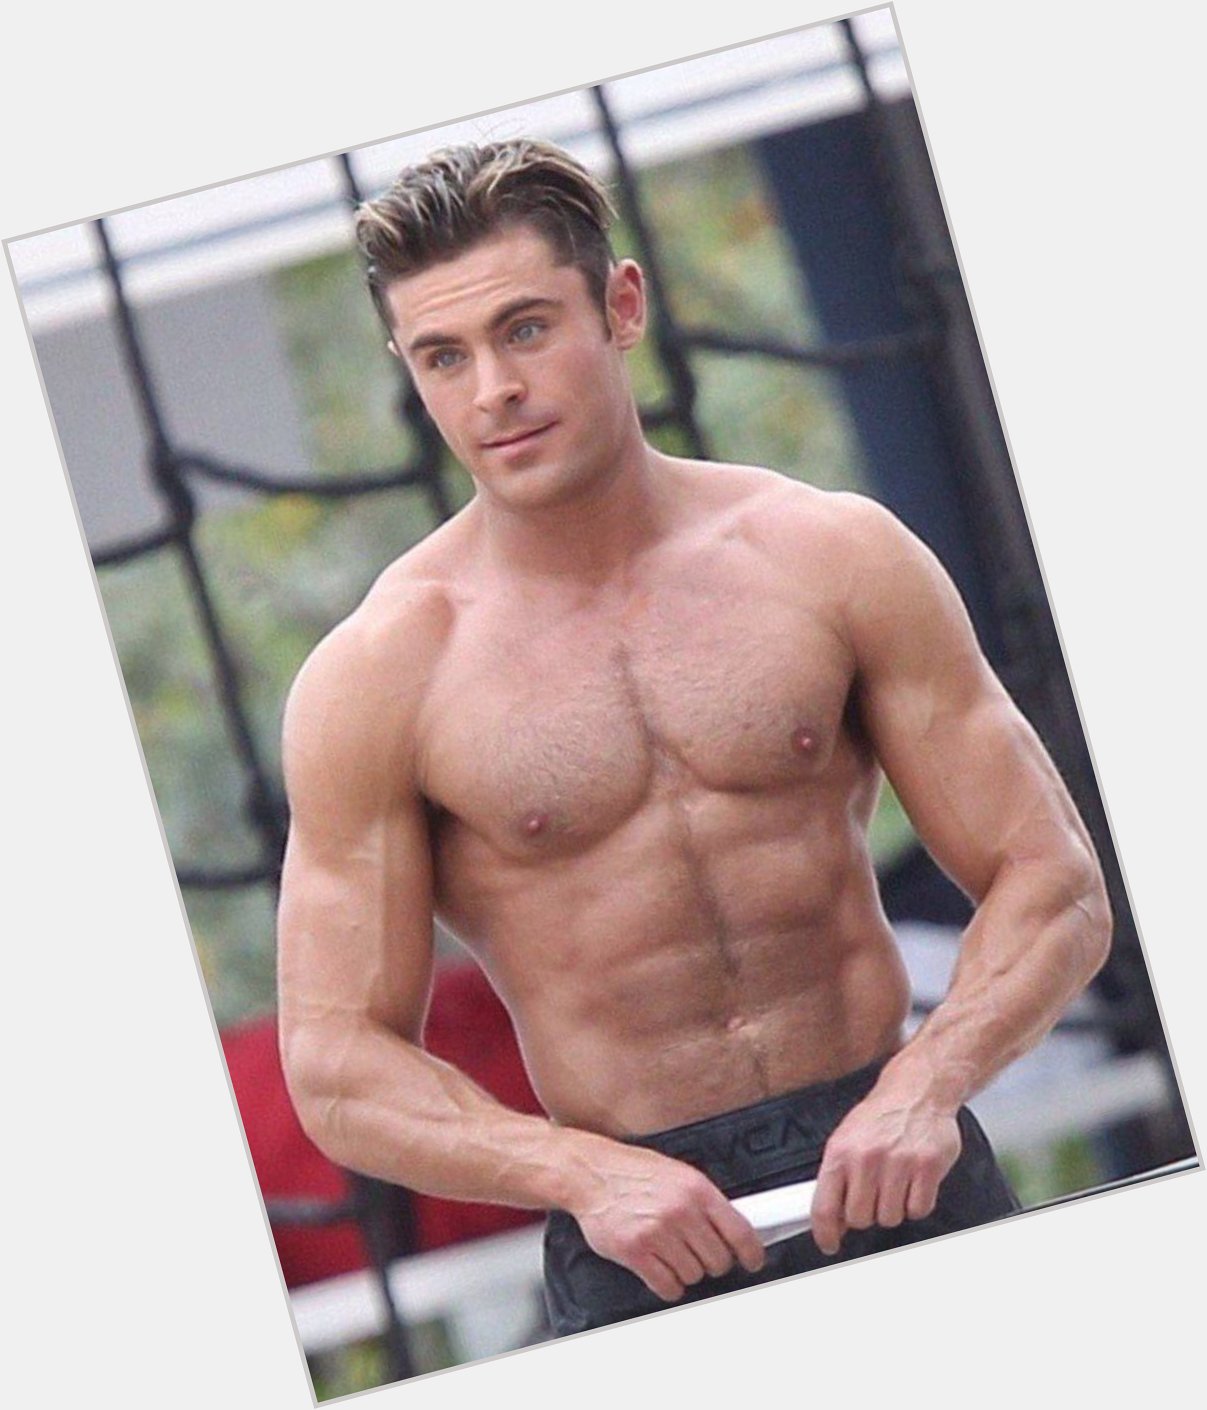 I just wanna say happy birthday to zac efron, my absolute favorite. 